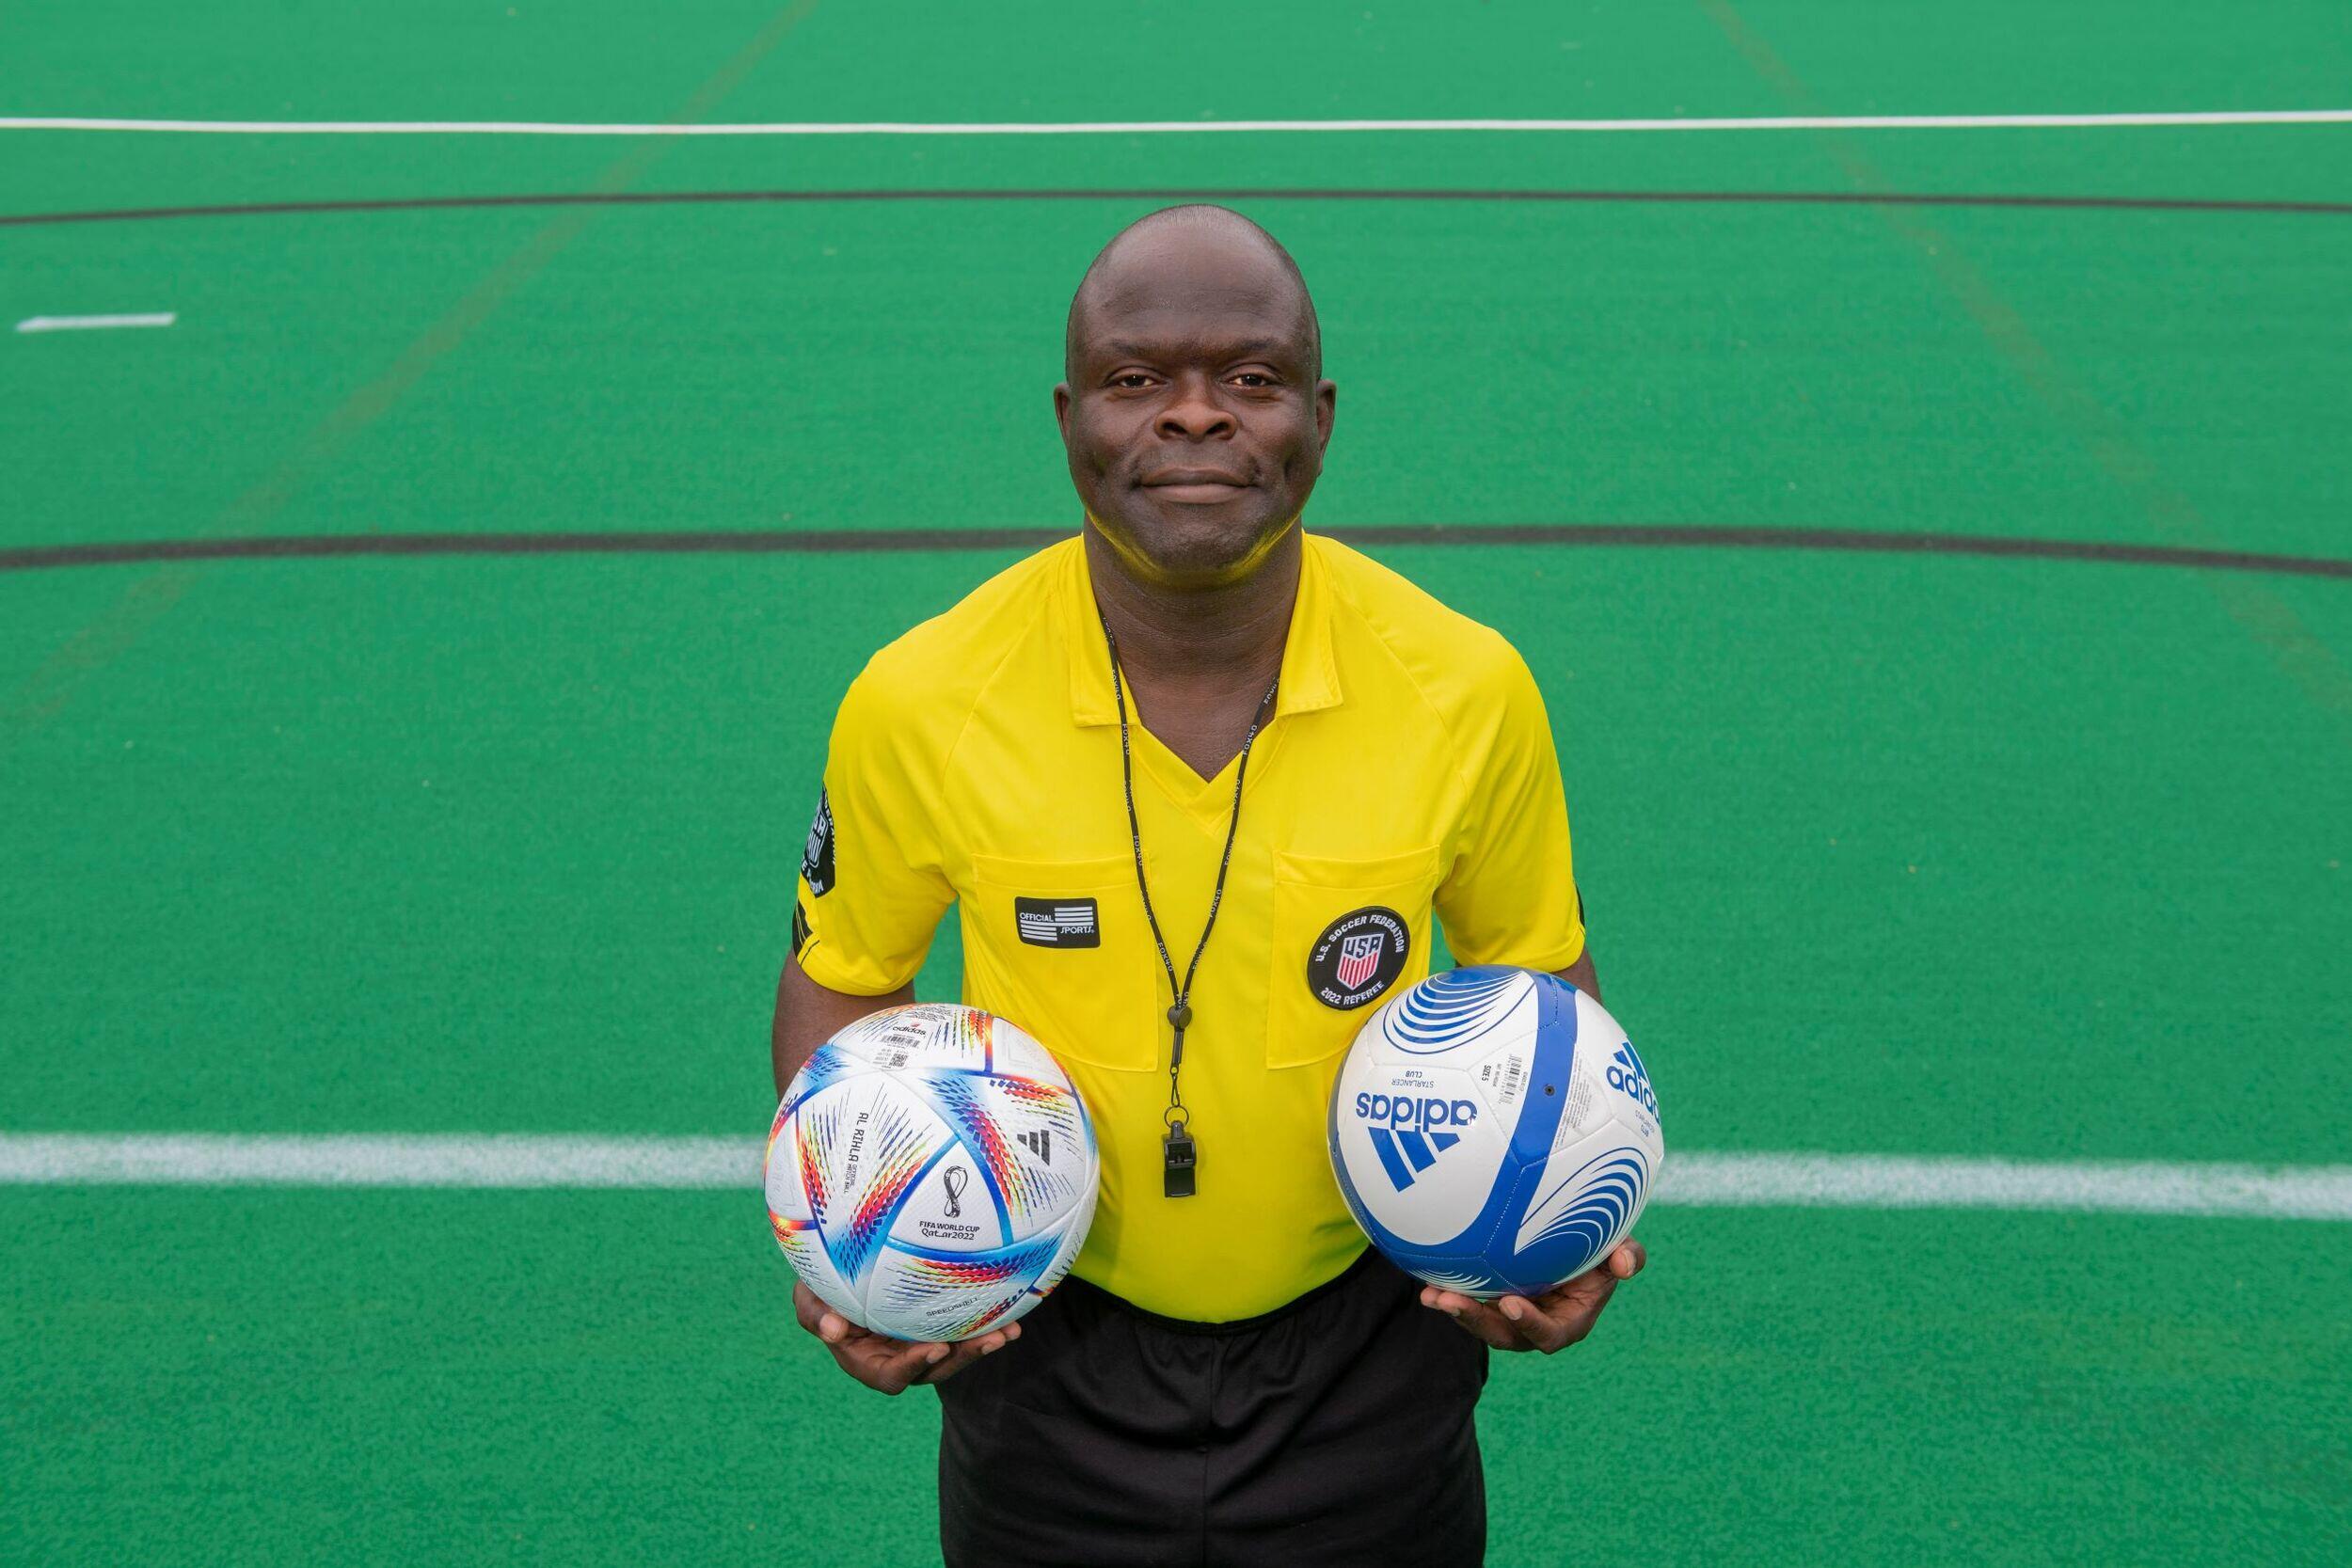 Kwasi Deitutu, wearing a soccer ref's uniform, holds two soccer balls.